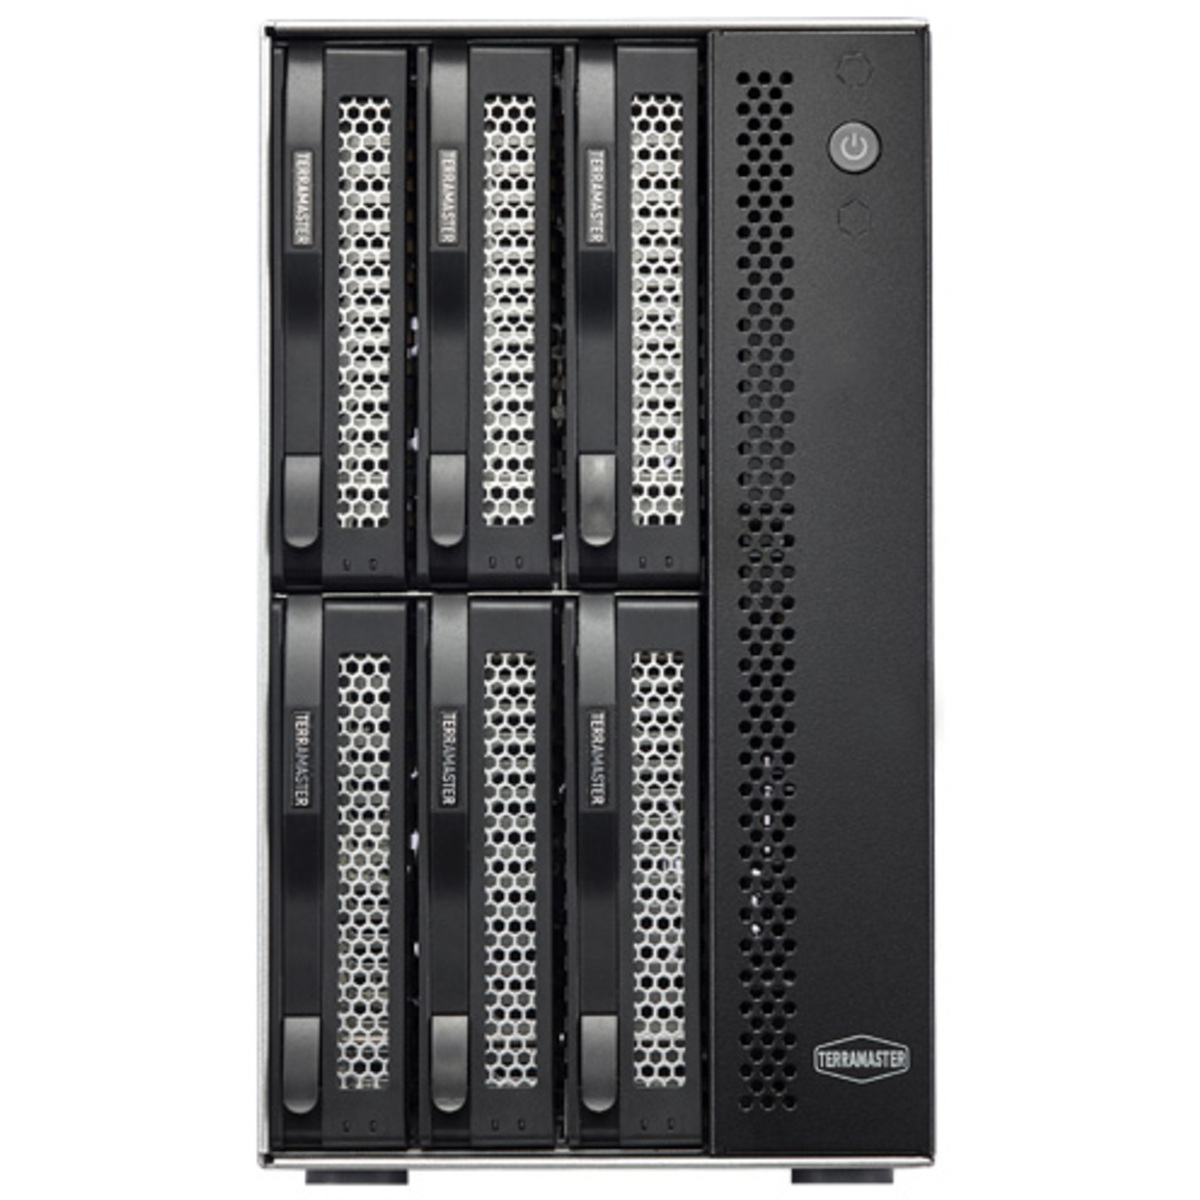 TerraMaster T6-423 40tb 6-Bay Desktop Multimedia / Power User / Business NAS - Network Attached Storage Device 4x10tb Seagate EXOS X18 ST10000NM018G 3.5 7200rpm SATA 6Gb/s HDD ENTERPRISE Class Drives Installed - Burn-In Tested - FREE RAM UPGRADE T6-423